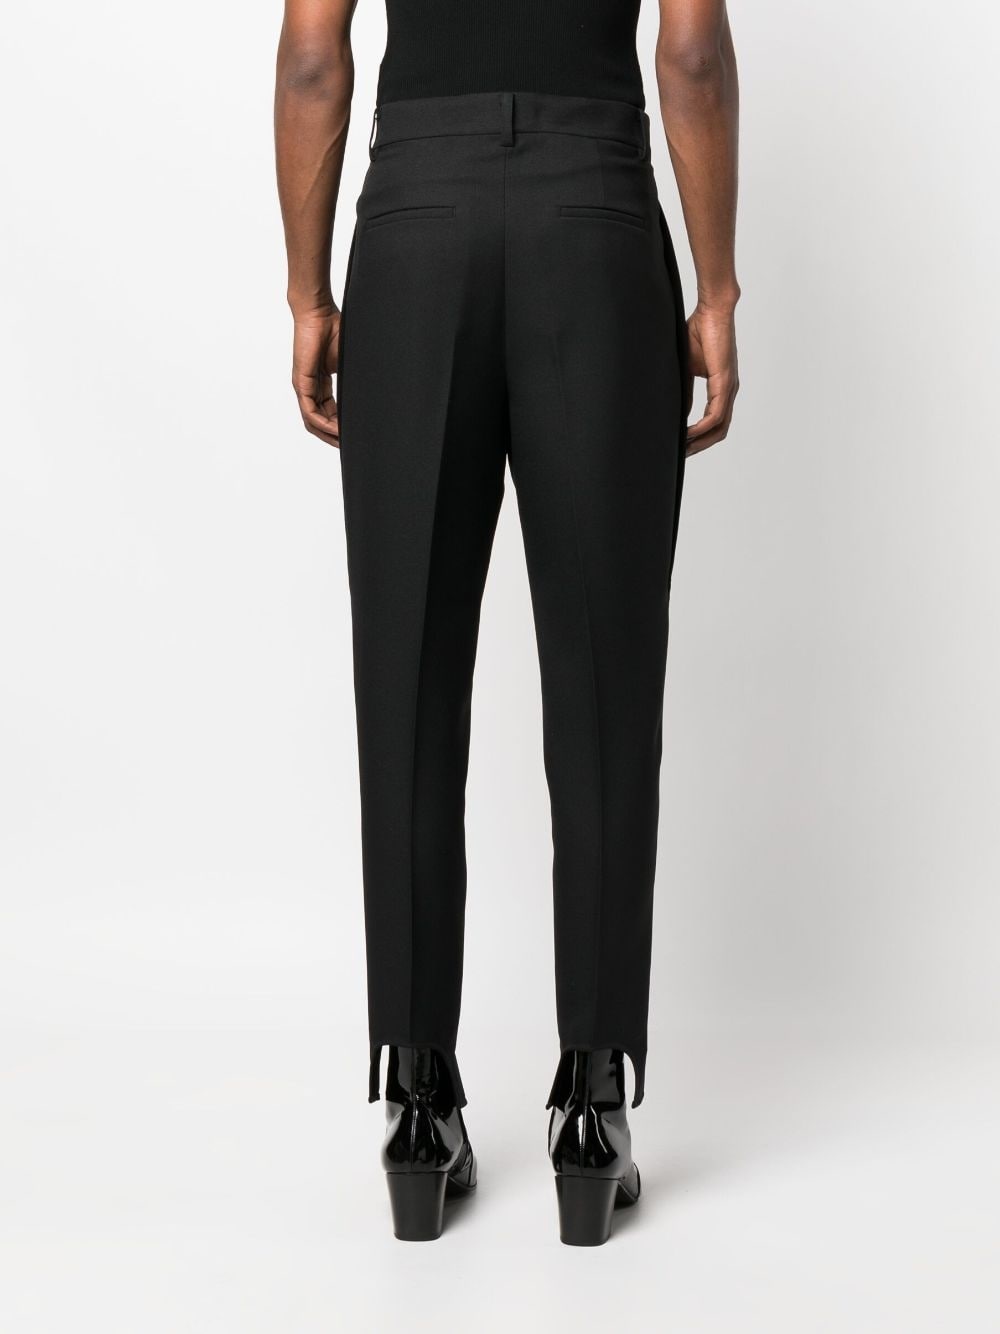 tapered stirrup trousers - 4